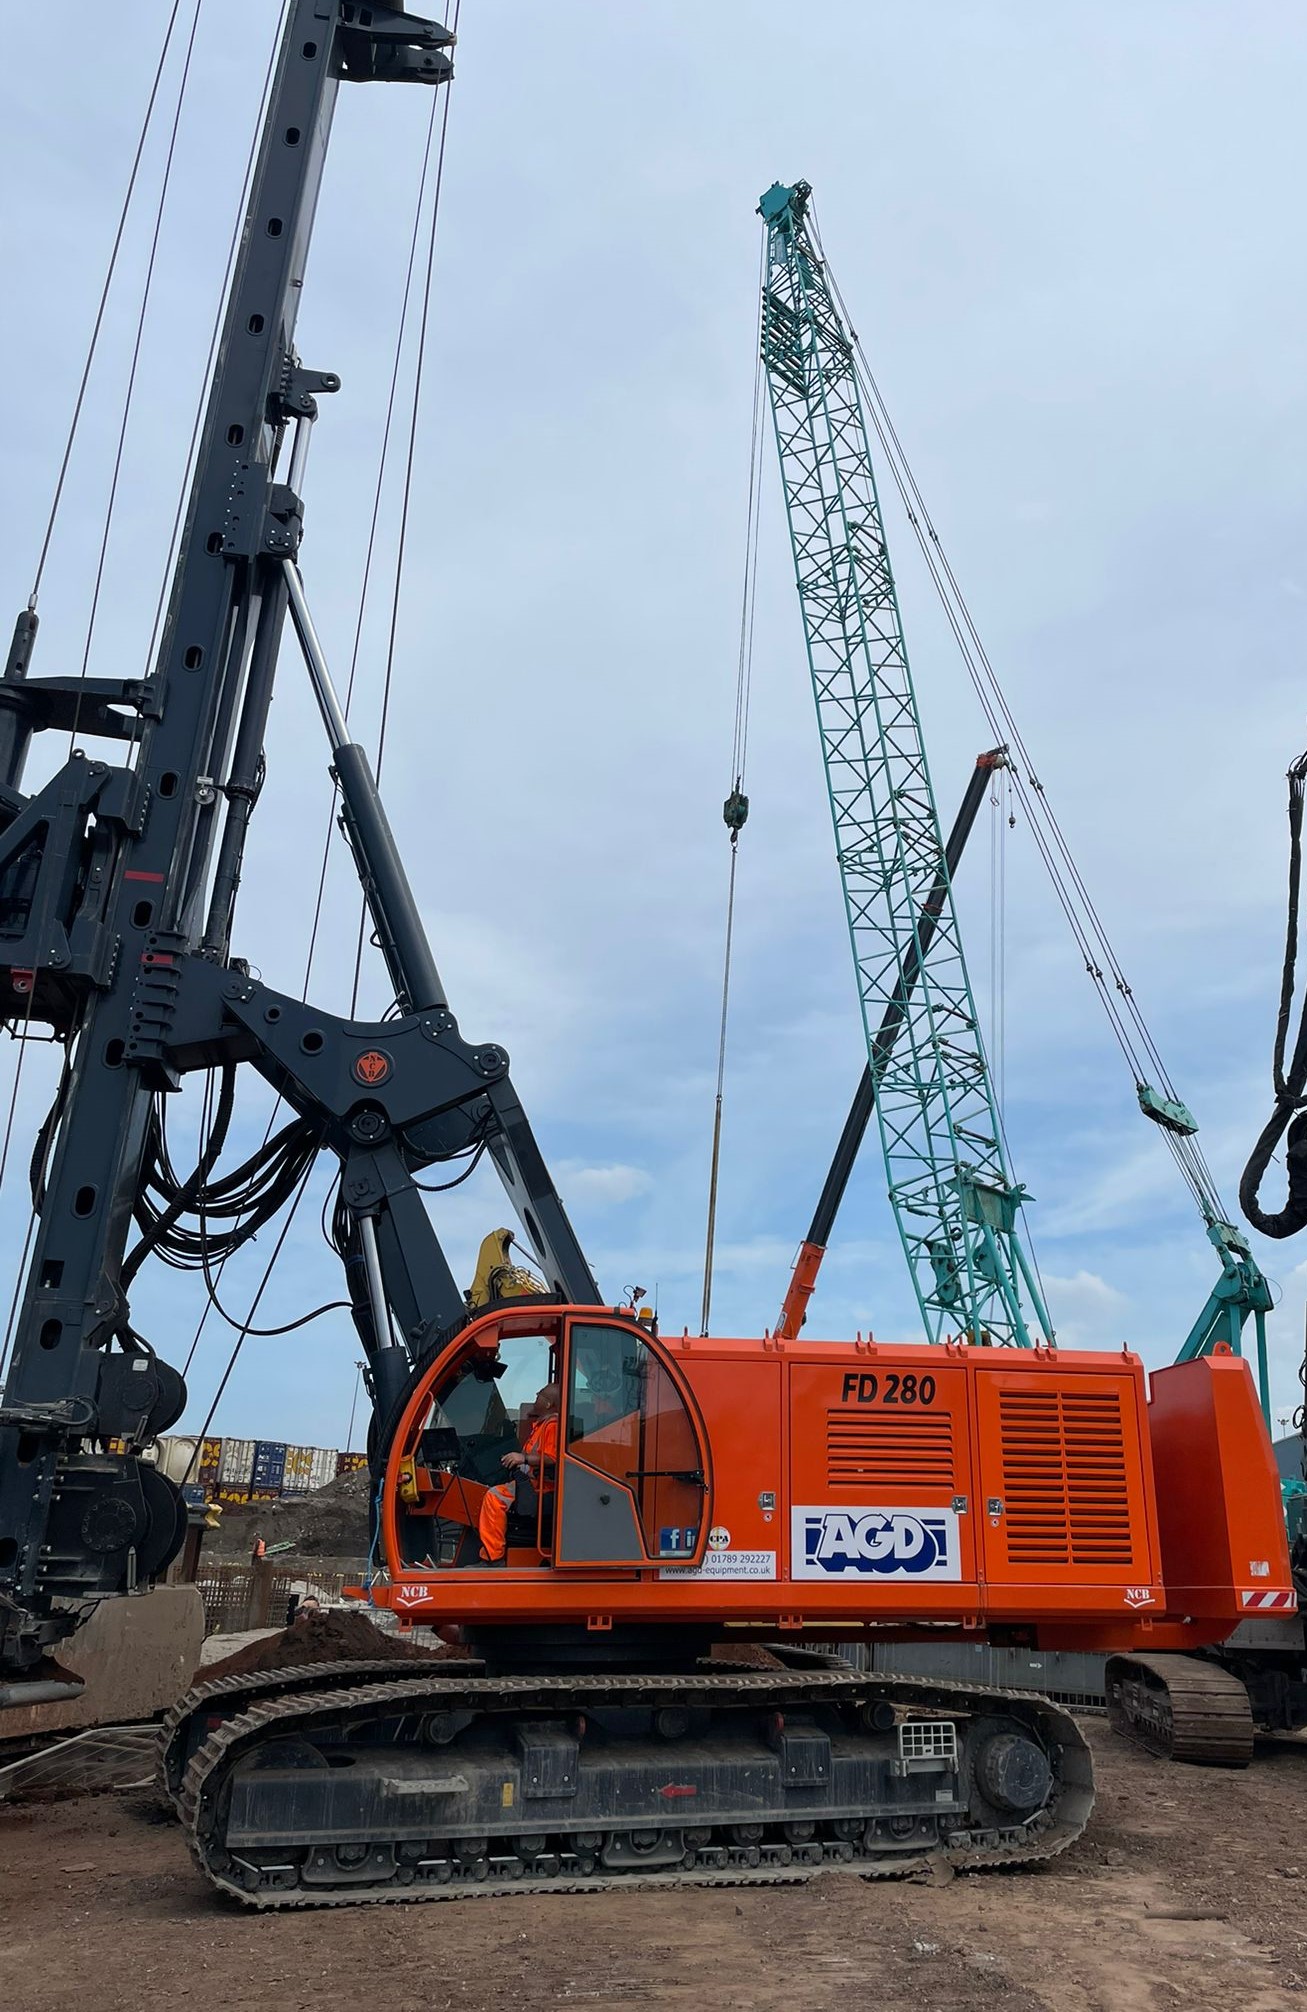 UK Suppliers of UK Pioneer In Rotary Piling Rig Hire